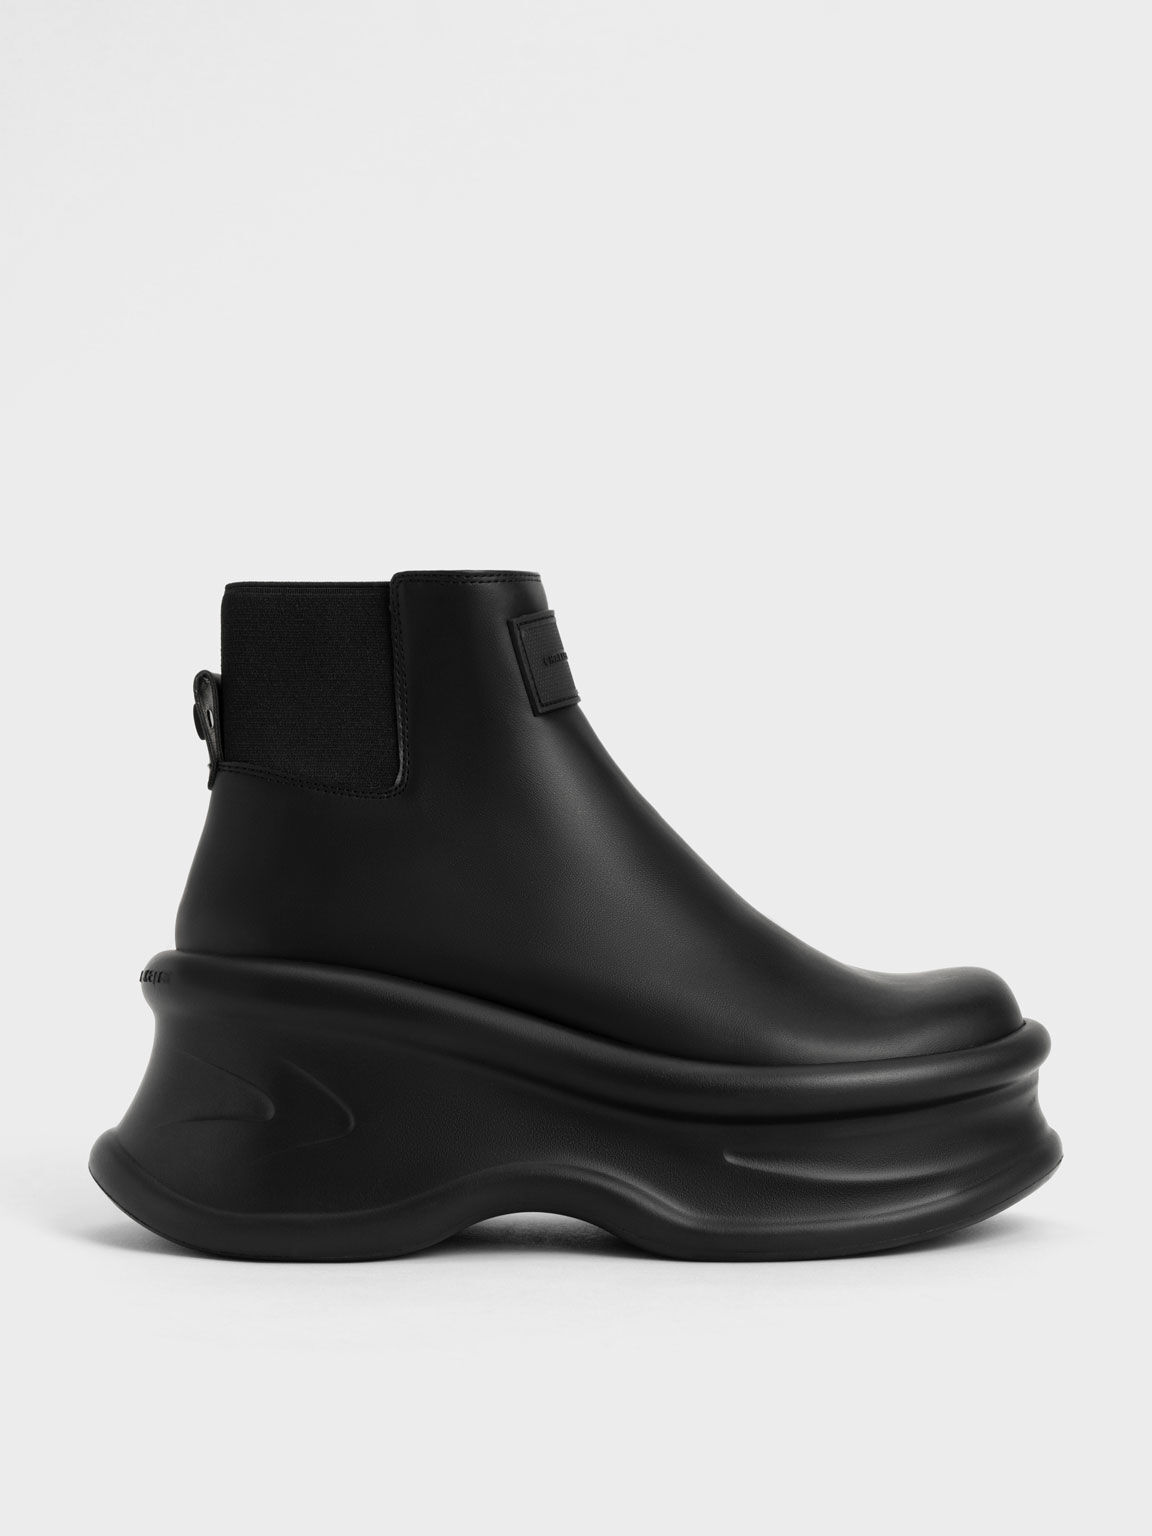 Black Curved Platform Ankle Boots - CHARLES & KEITH CA